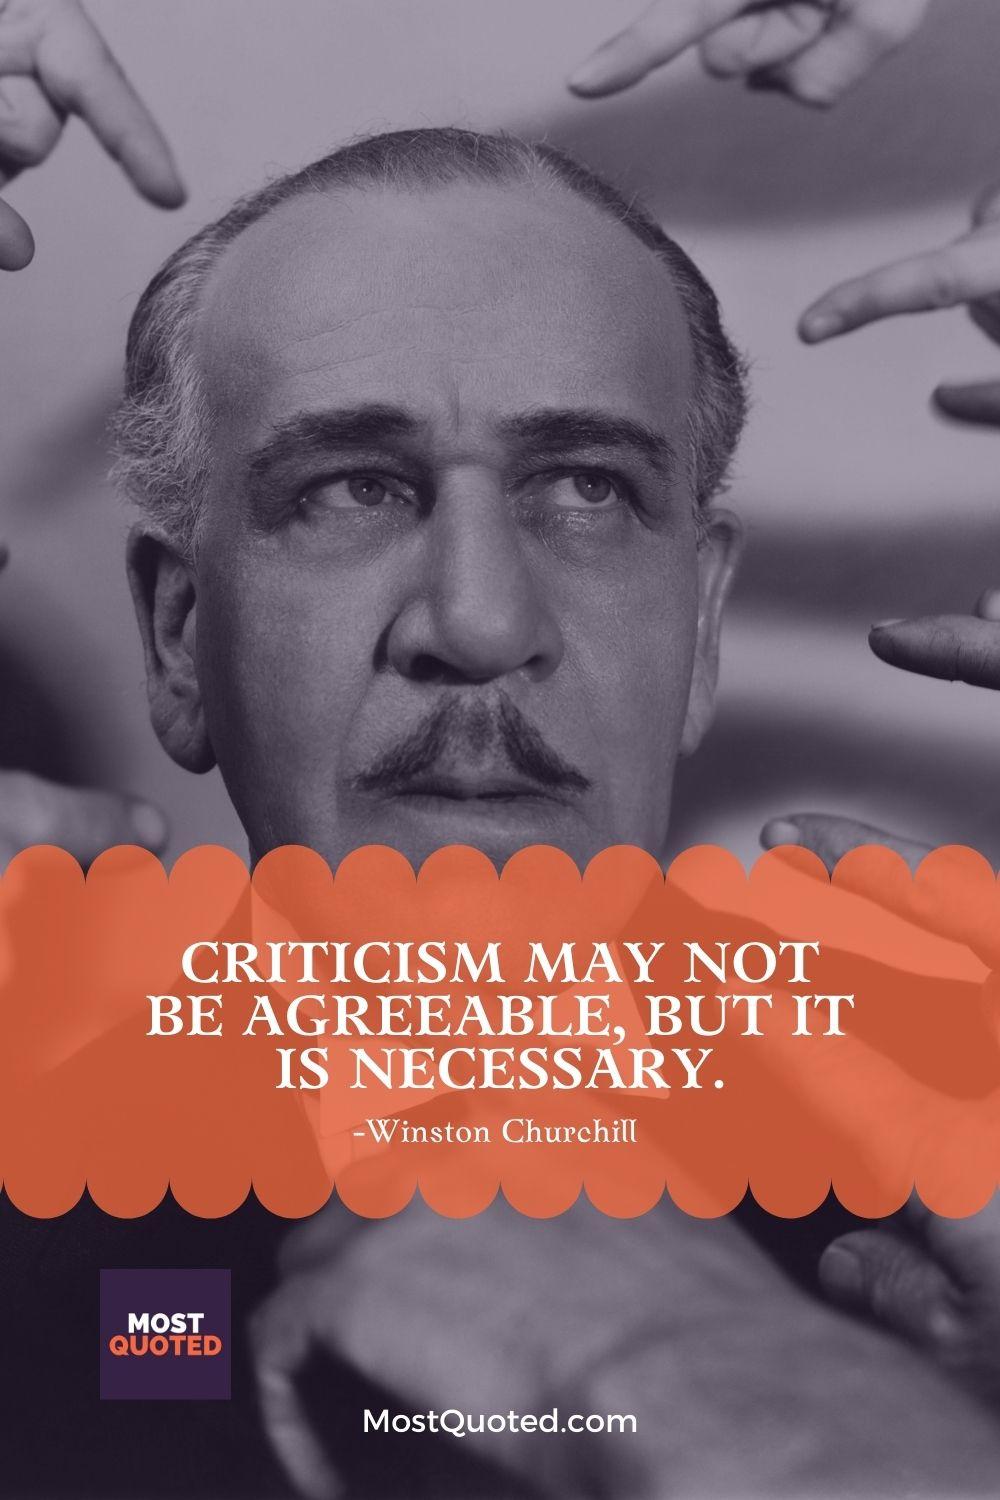 Criticism may not be agreeable, but it is necessary. - Winston Churchill